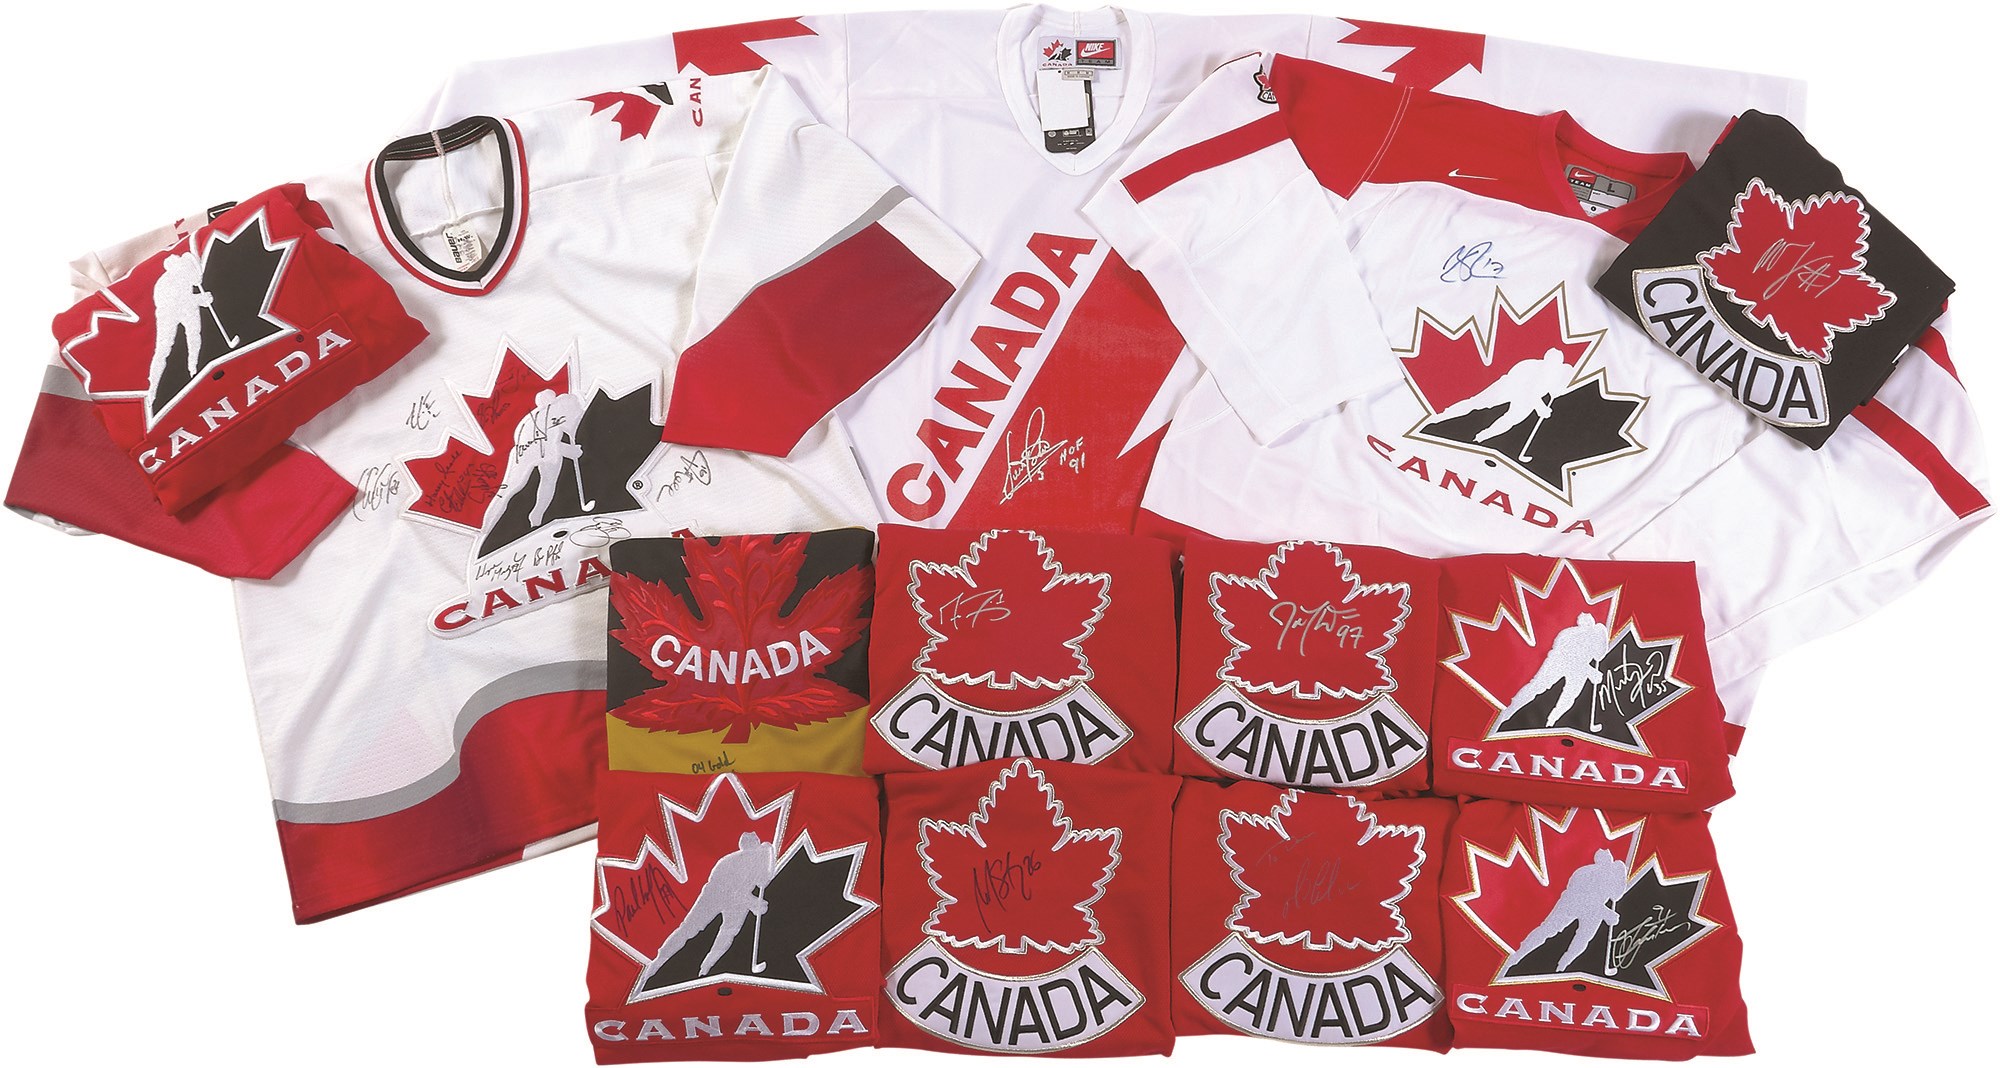 Team Canada World Cup Signed Jersey Collection w/1996 Team-Signed (40+)